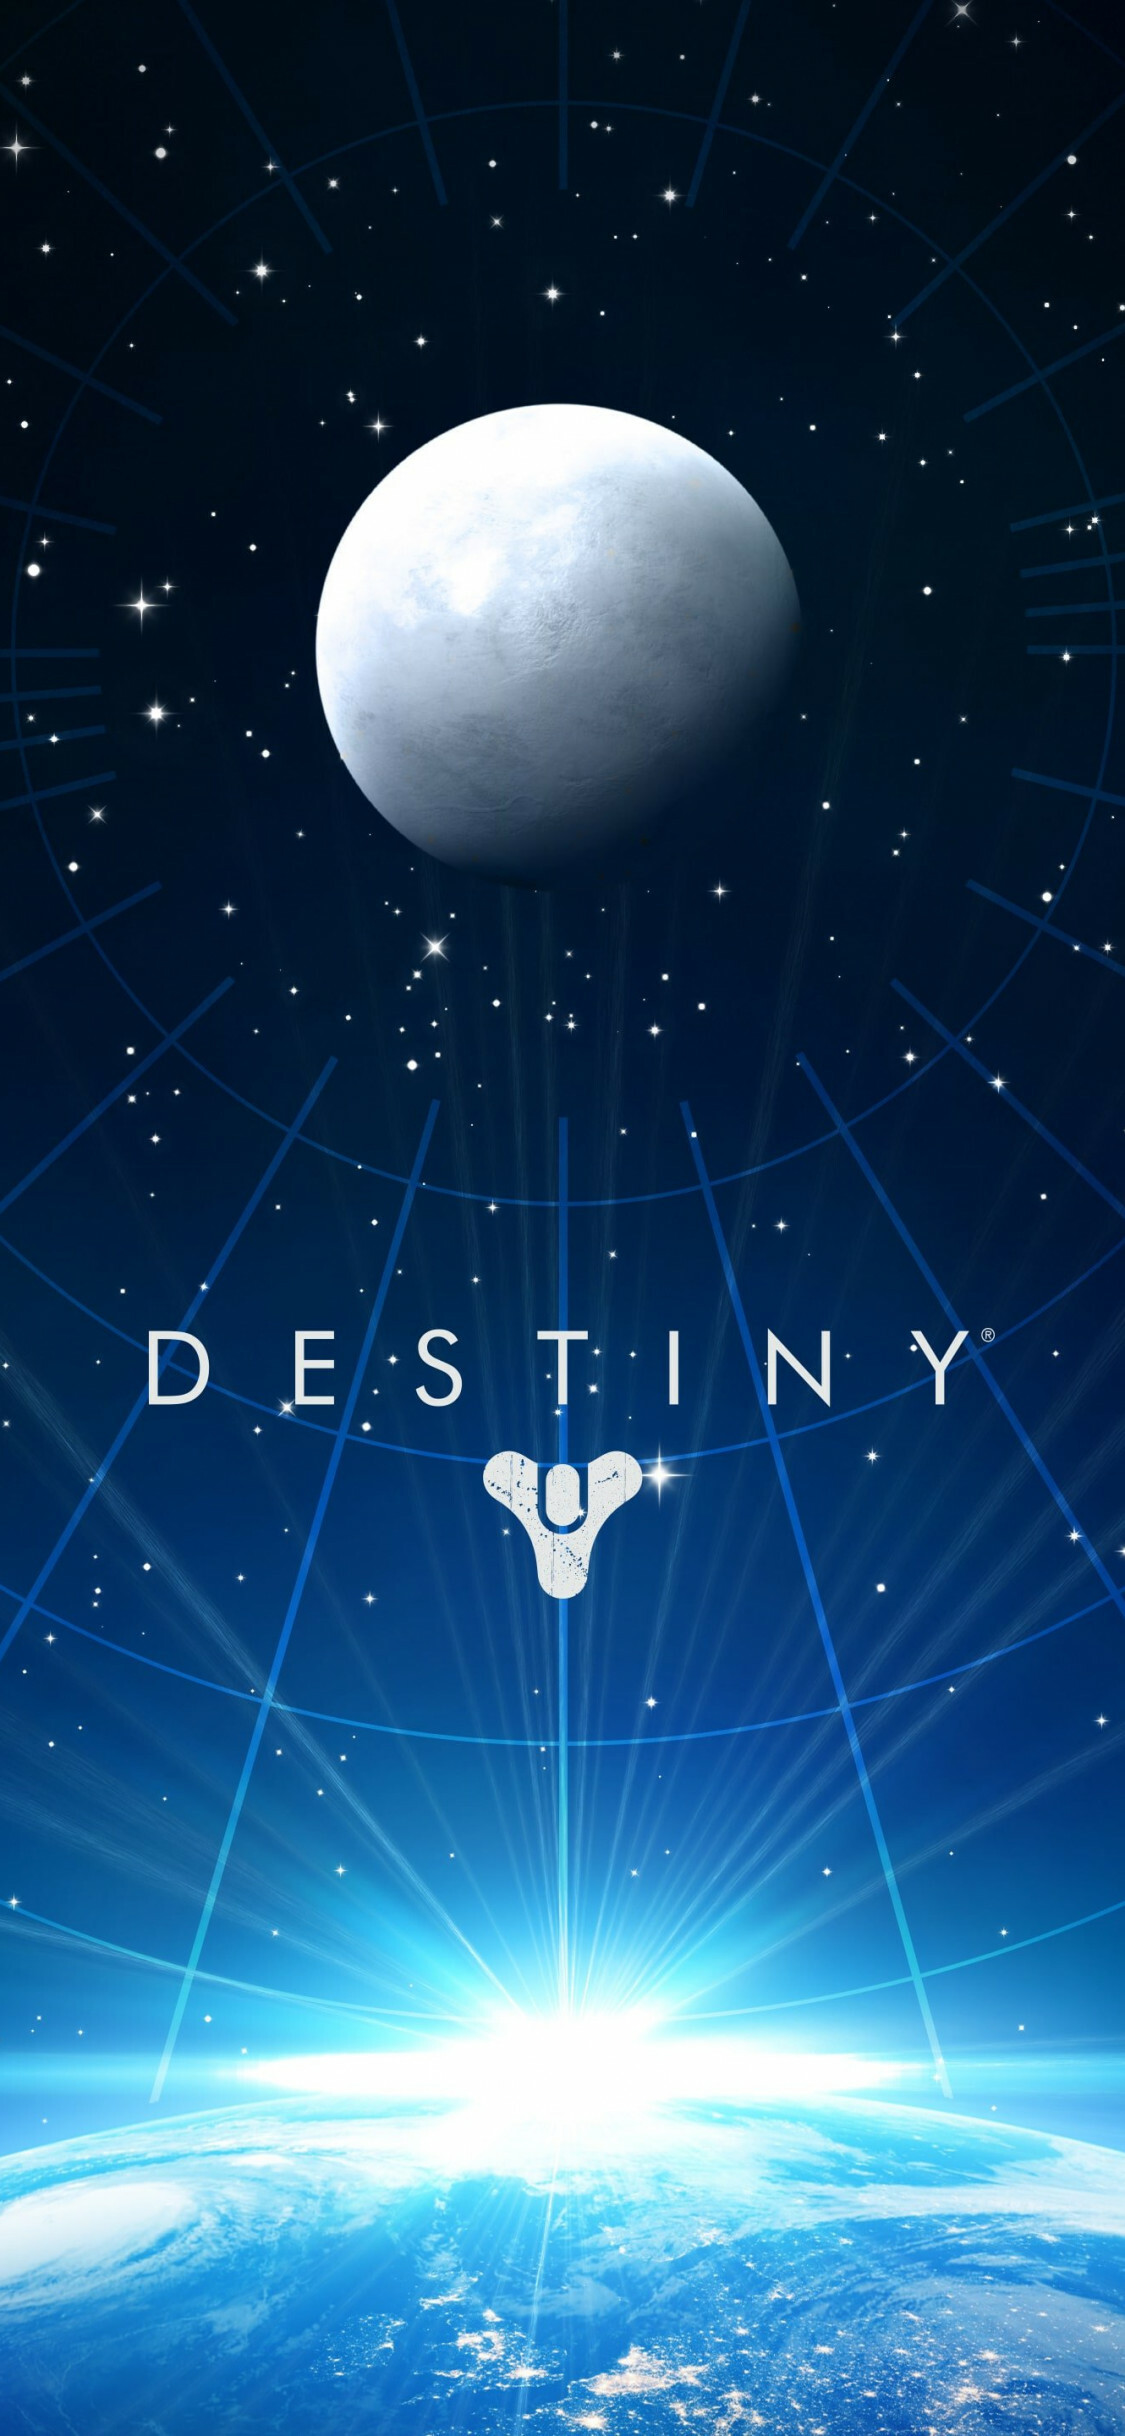 Destiny: Players' equipment includes weapons and armor, Legendary and exotic items are the best items for players' characters, and only one exotic weapon and one exotic armor can be equipped at one time, Online video game. 1130x2440 HD Background.